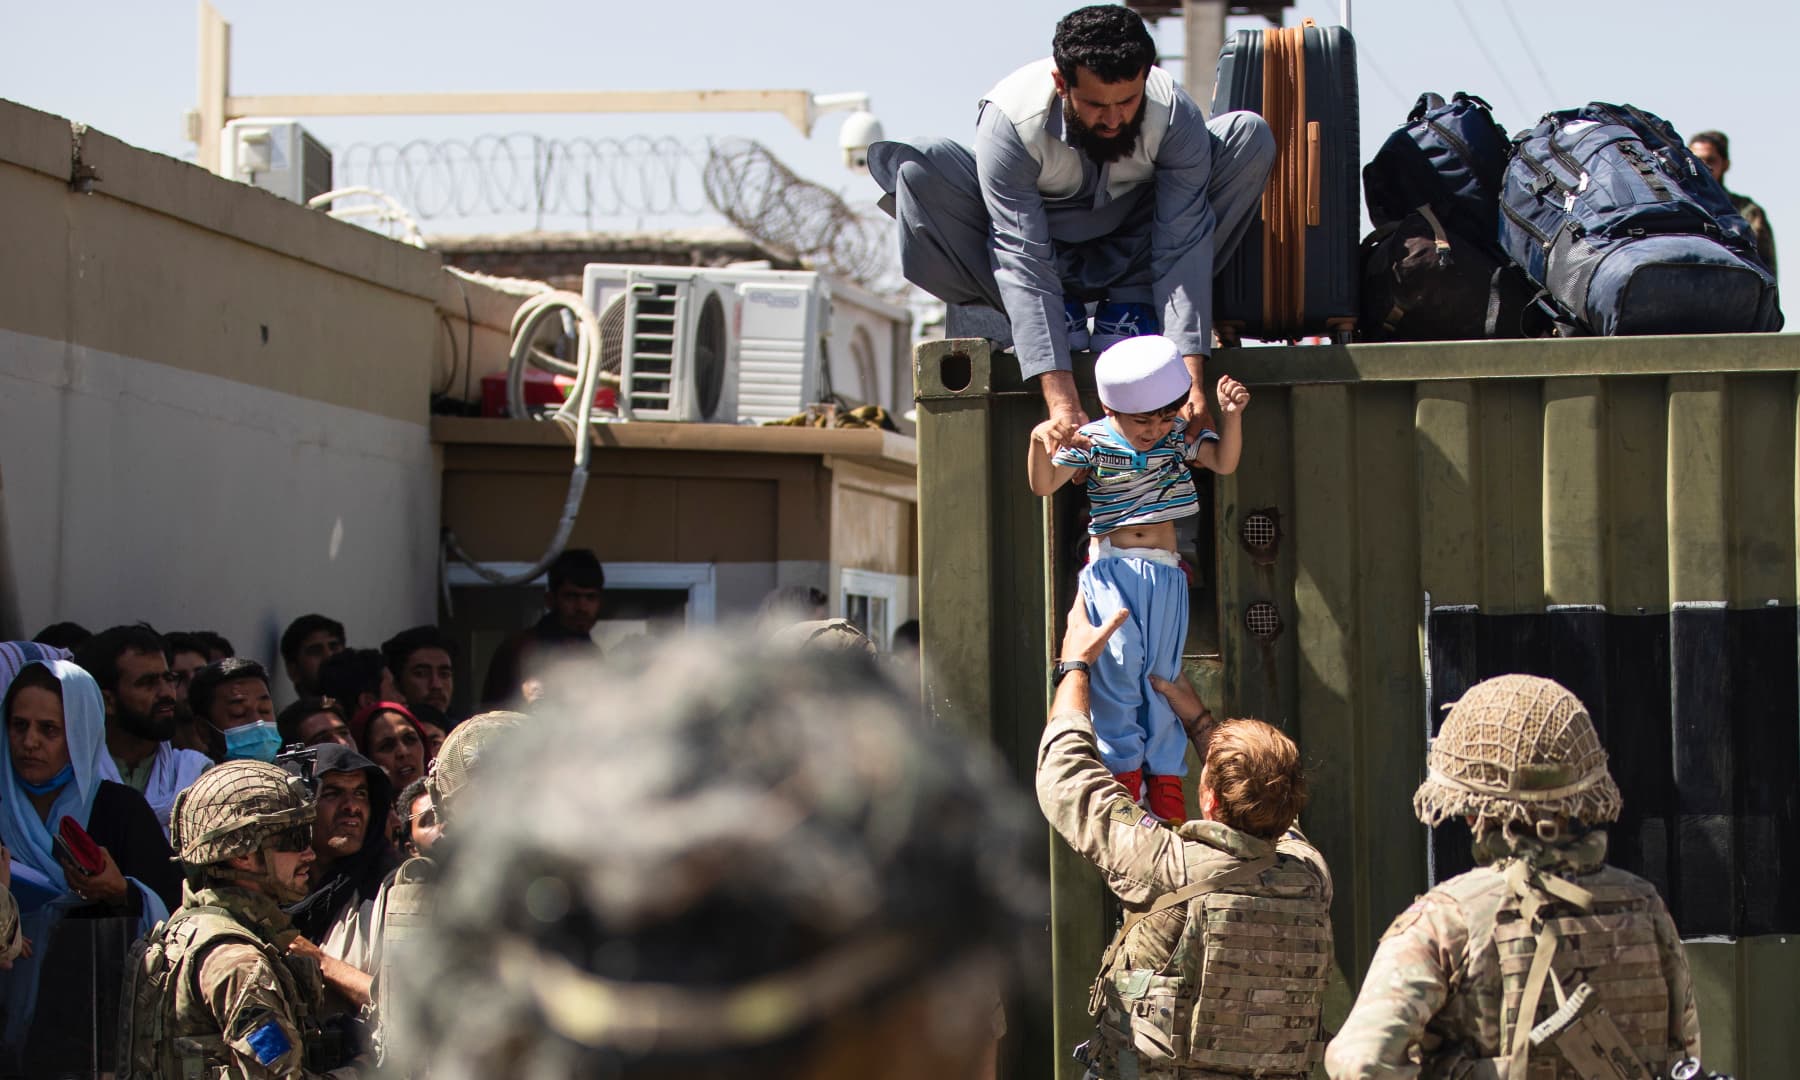 An Afghan man hands his child to a British Paratrooper assigned to 2nd Battalion, Parachute Regiment while a member of 1st Brigade Combat Team, 82nd Airborne Division conducts security at Hamid Karzai International Airport in Kabul, Afghanistan on August 26, 2021. — AP